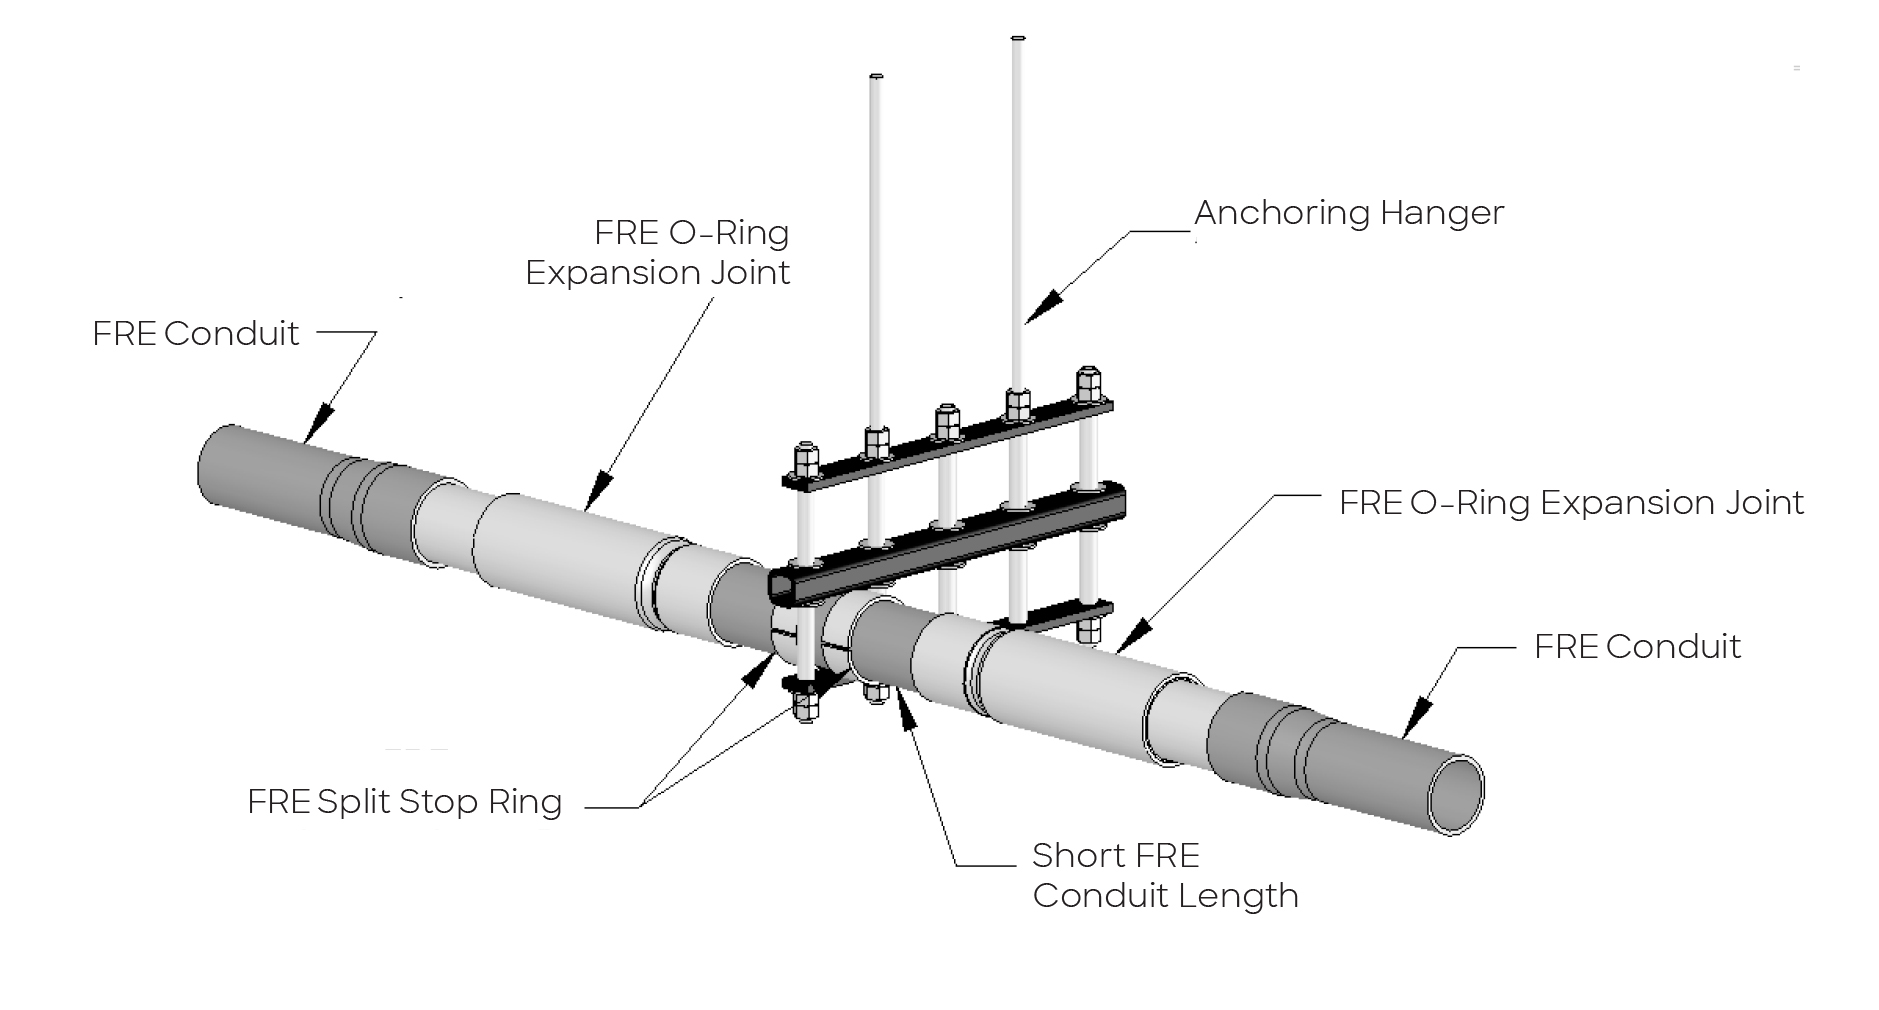 O-Ring expansion joints